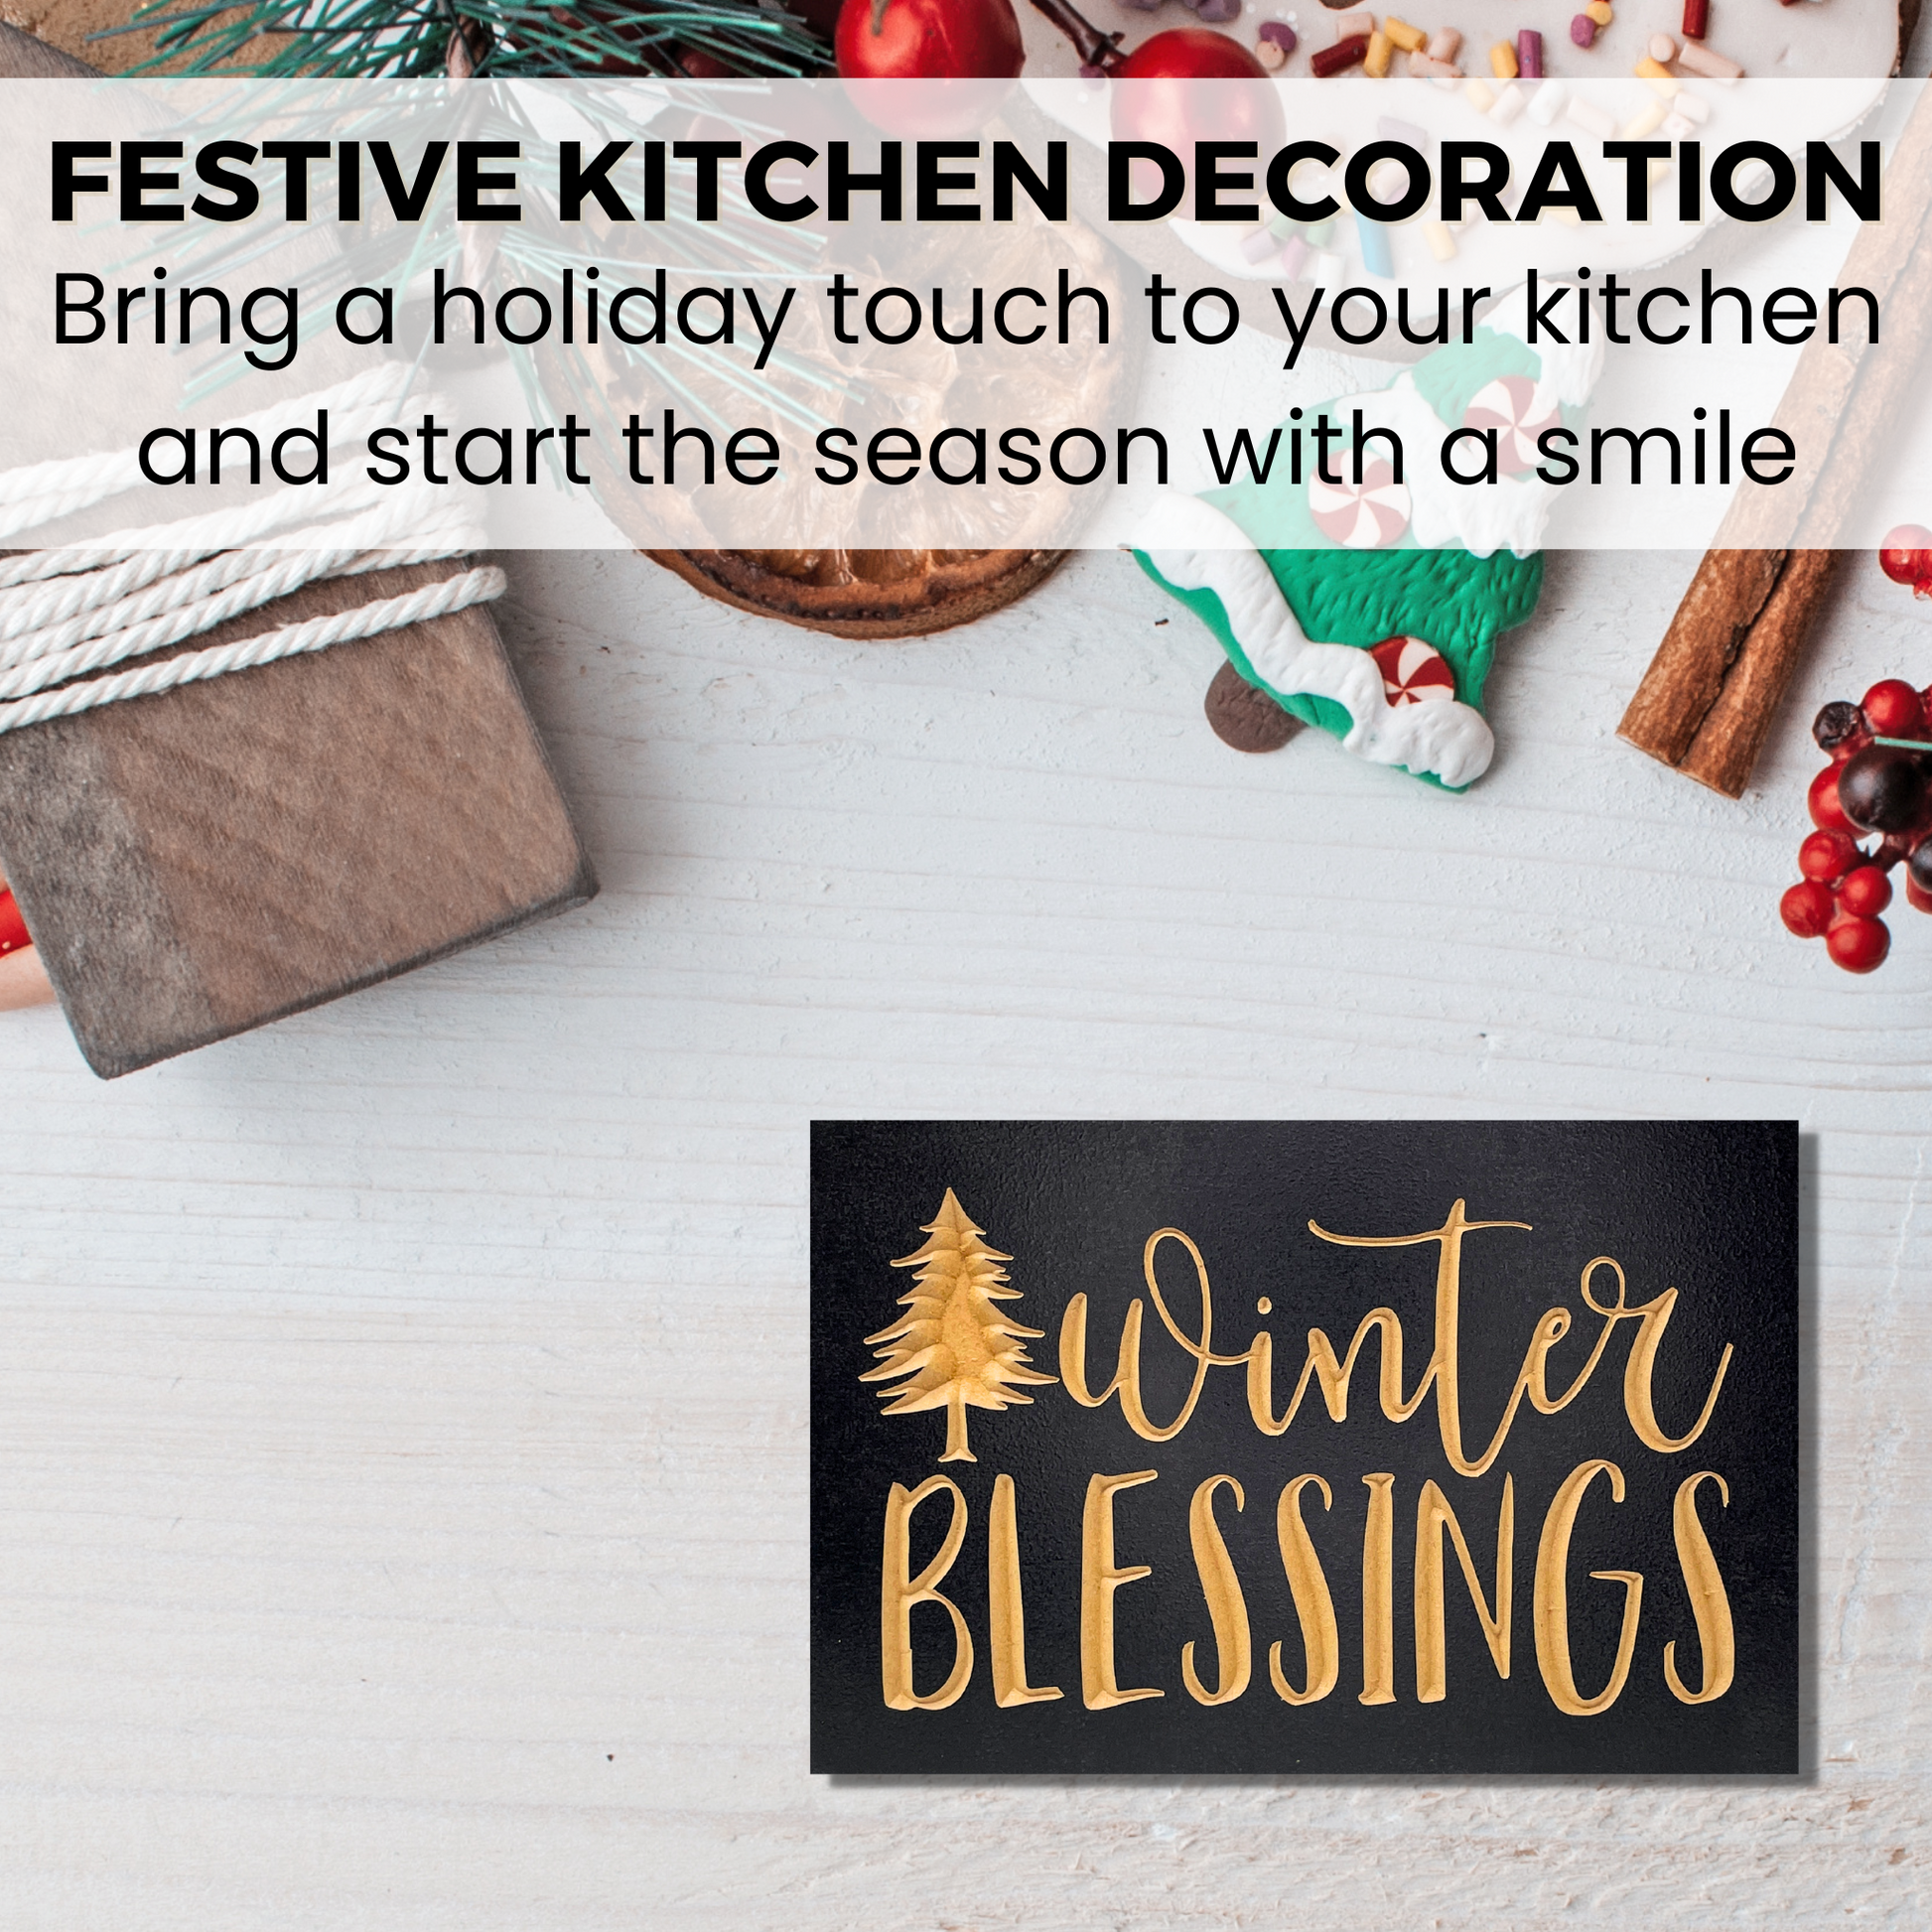 Winter Blessings Christmas Decoration Kitchen Decor Sign